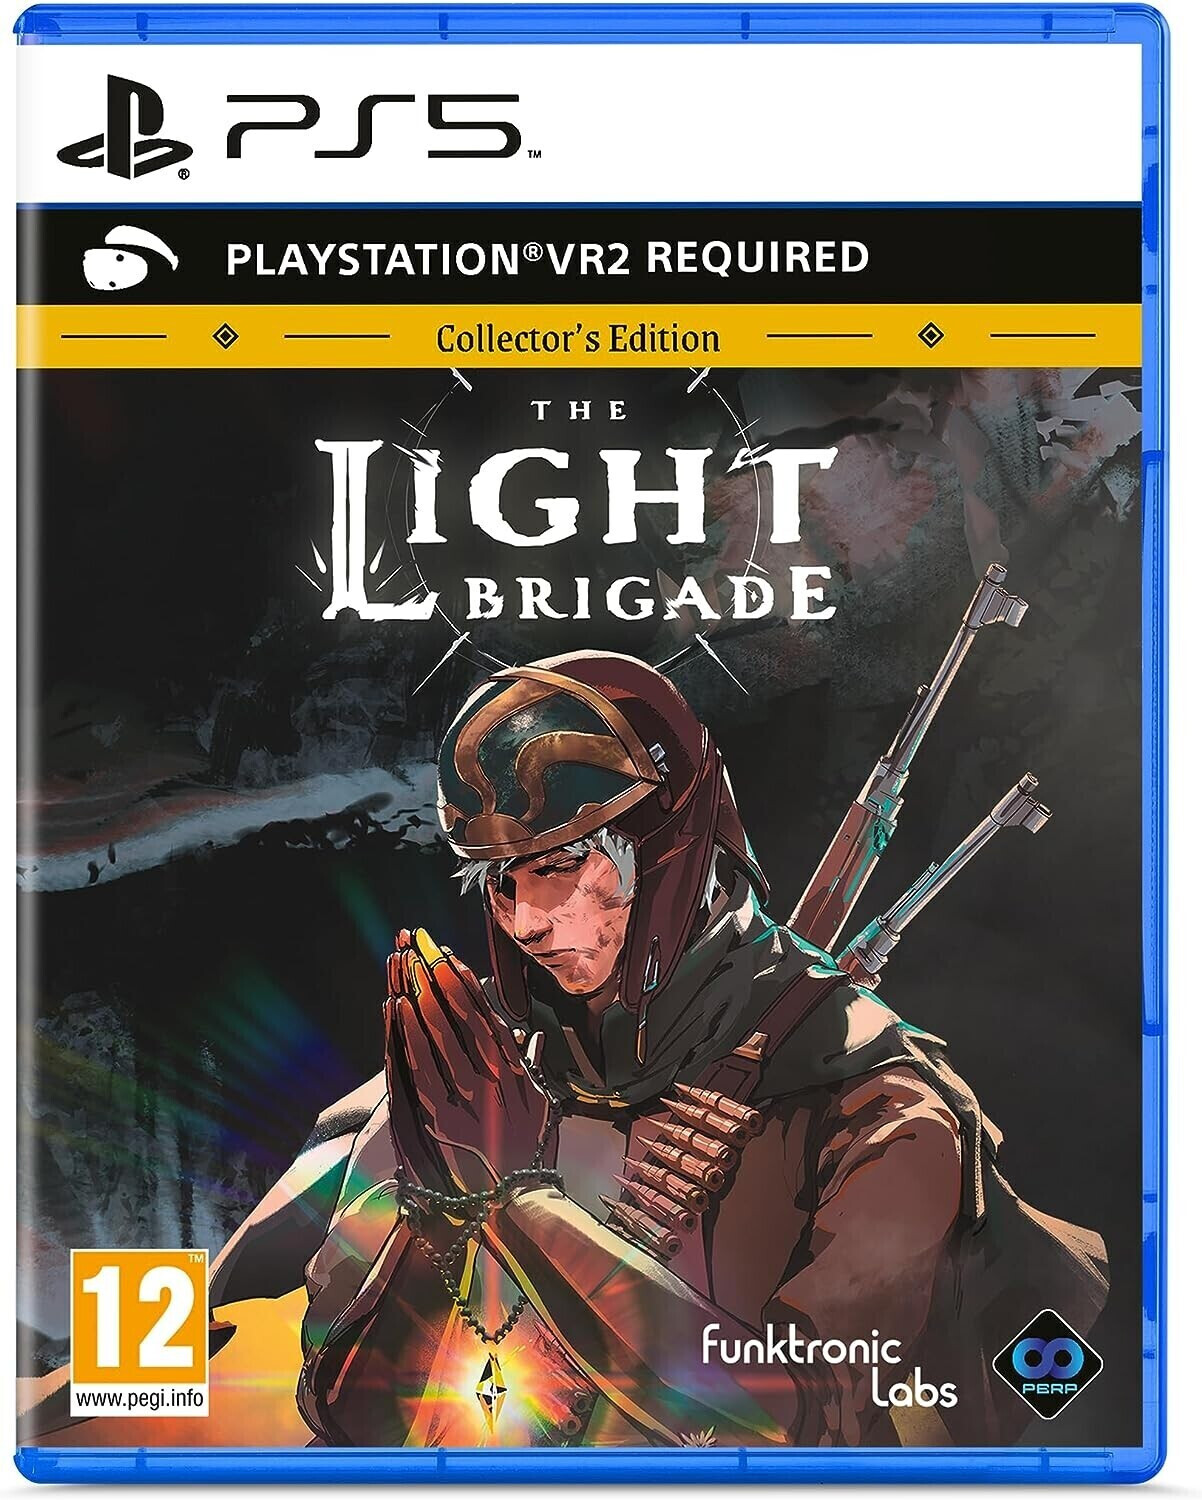 Buy The Light Brigade: Collector's Edition (VR2) (PS5) from £21.90 (Today)  – Best Deals on